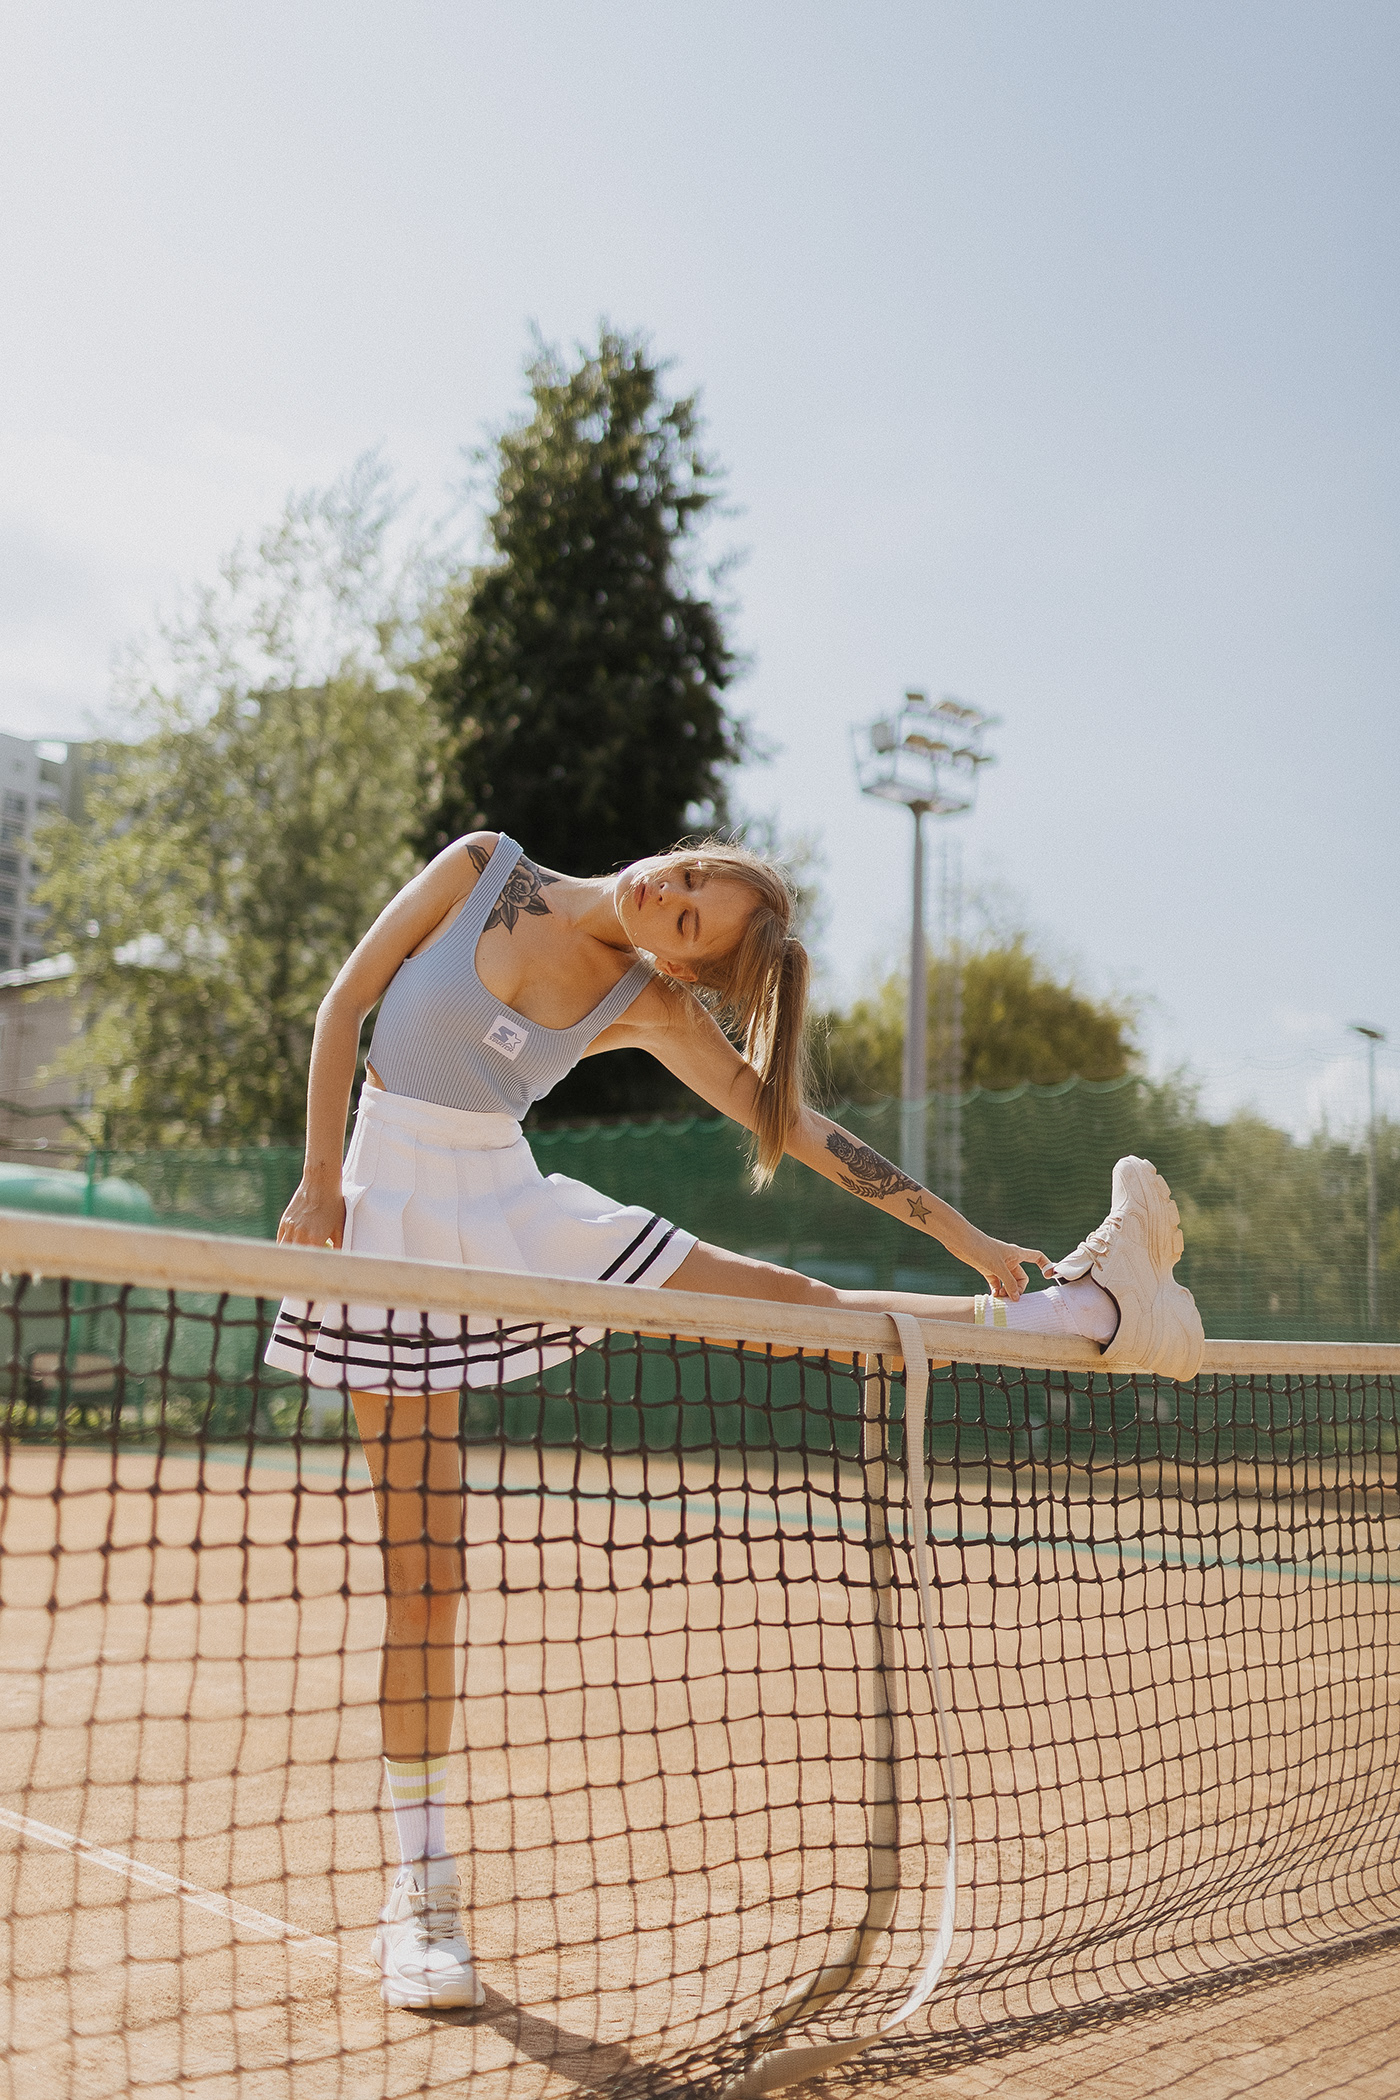 court editorial Fashion  fashion photography model Photography  portrait tennis wet wet girl